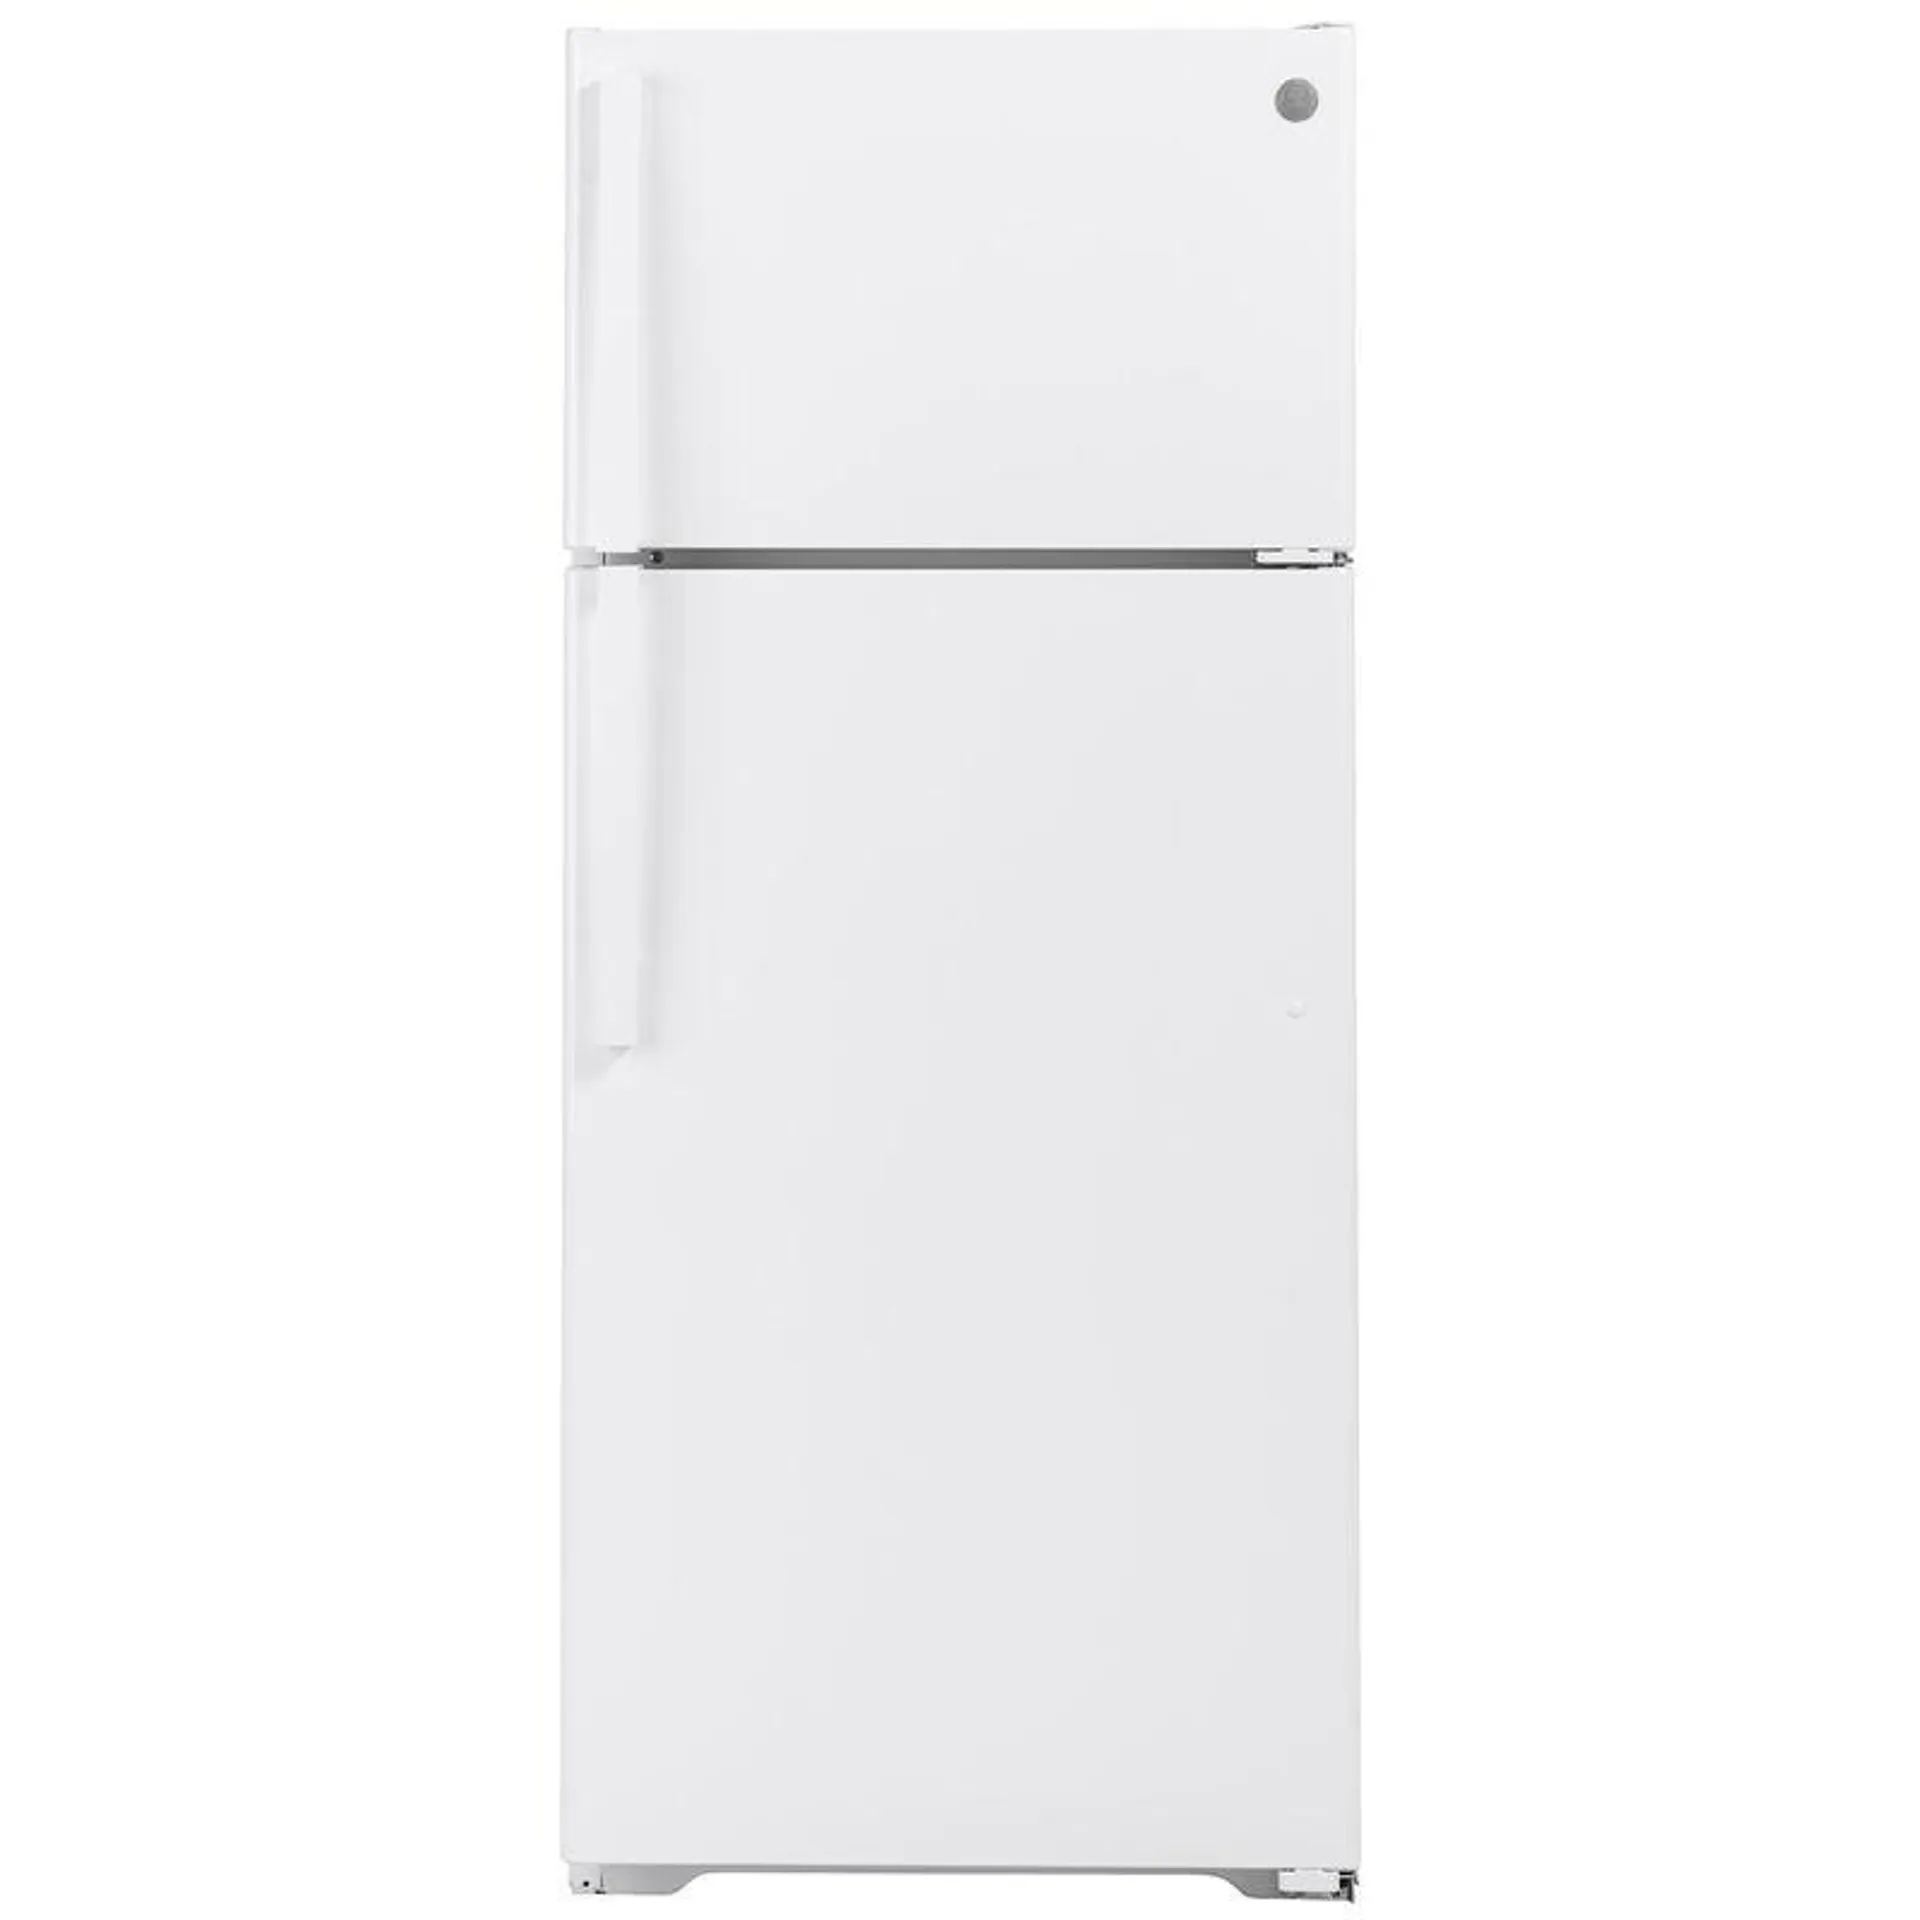 GE 28 in. 17.5 cu. ft. Top Freezer Refrigerator - Smooth White